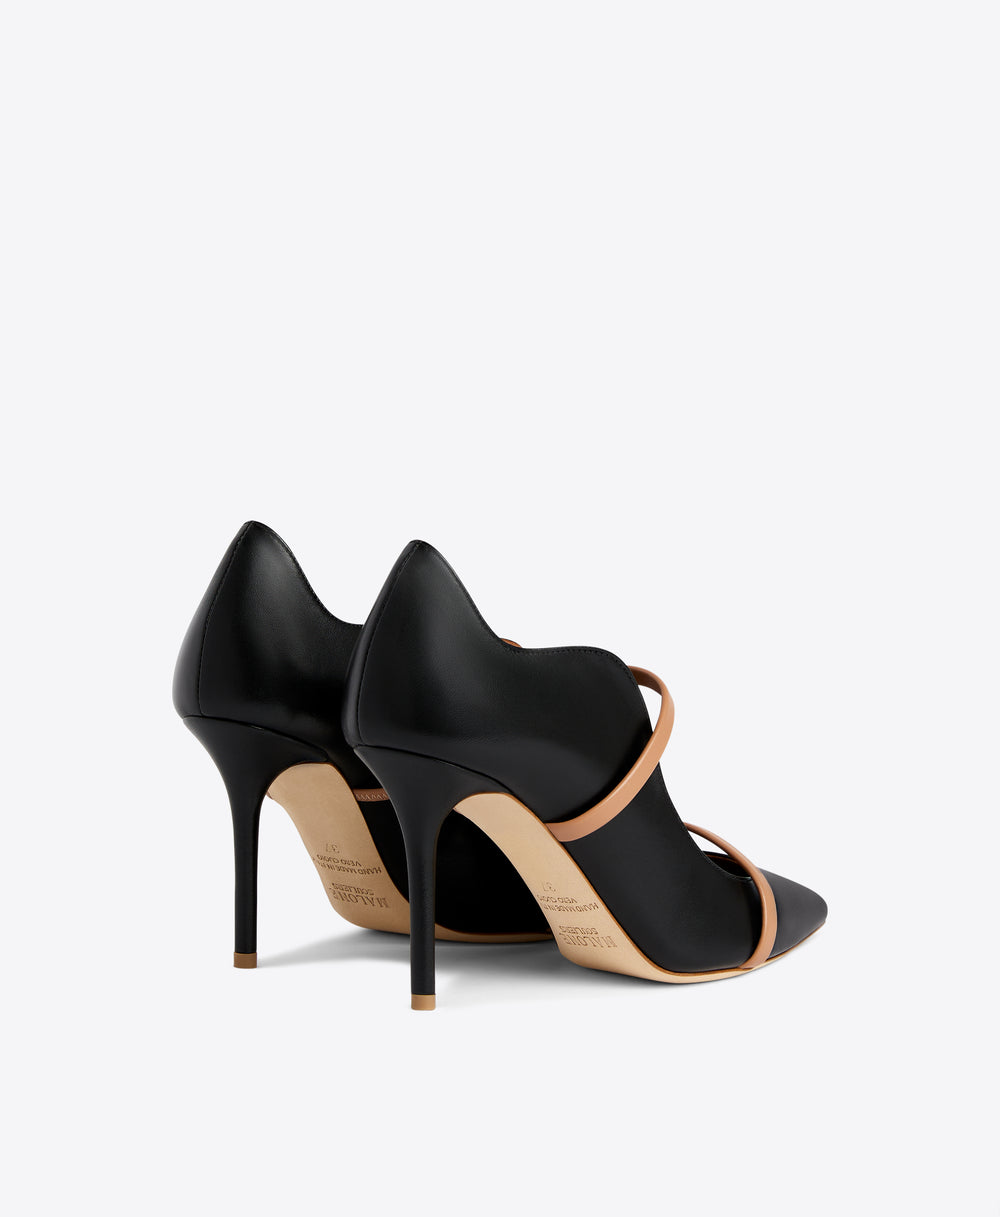 Malone Souliers Maureen 85 Black and Blush Pink Leather Pumps